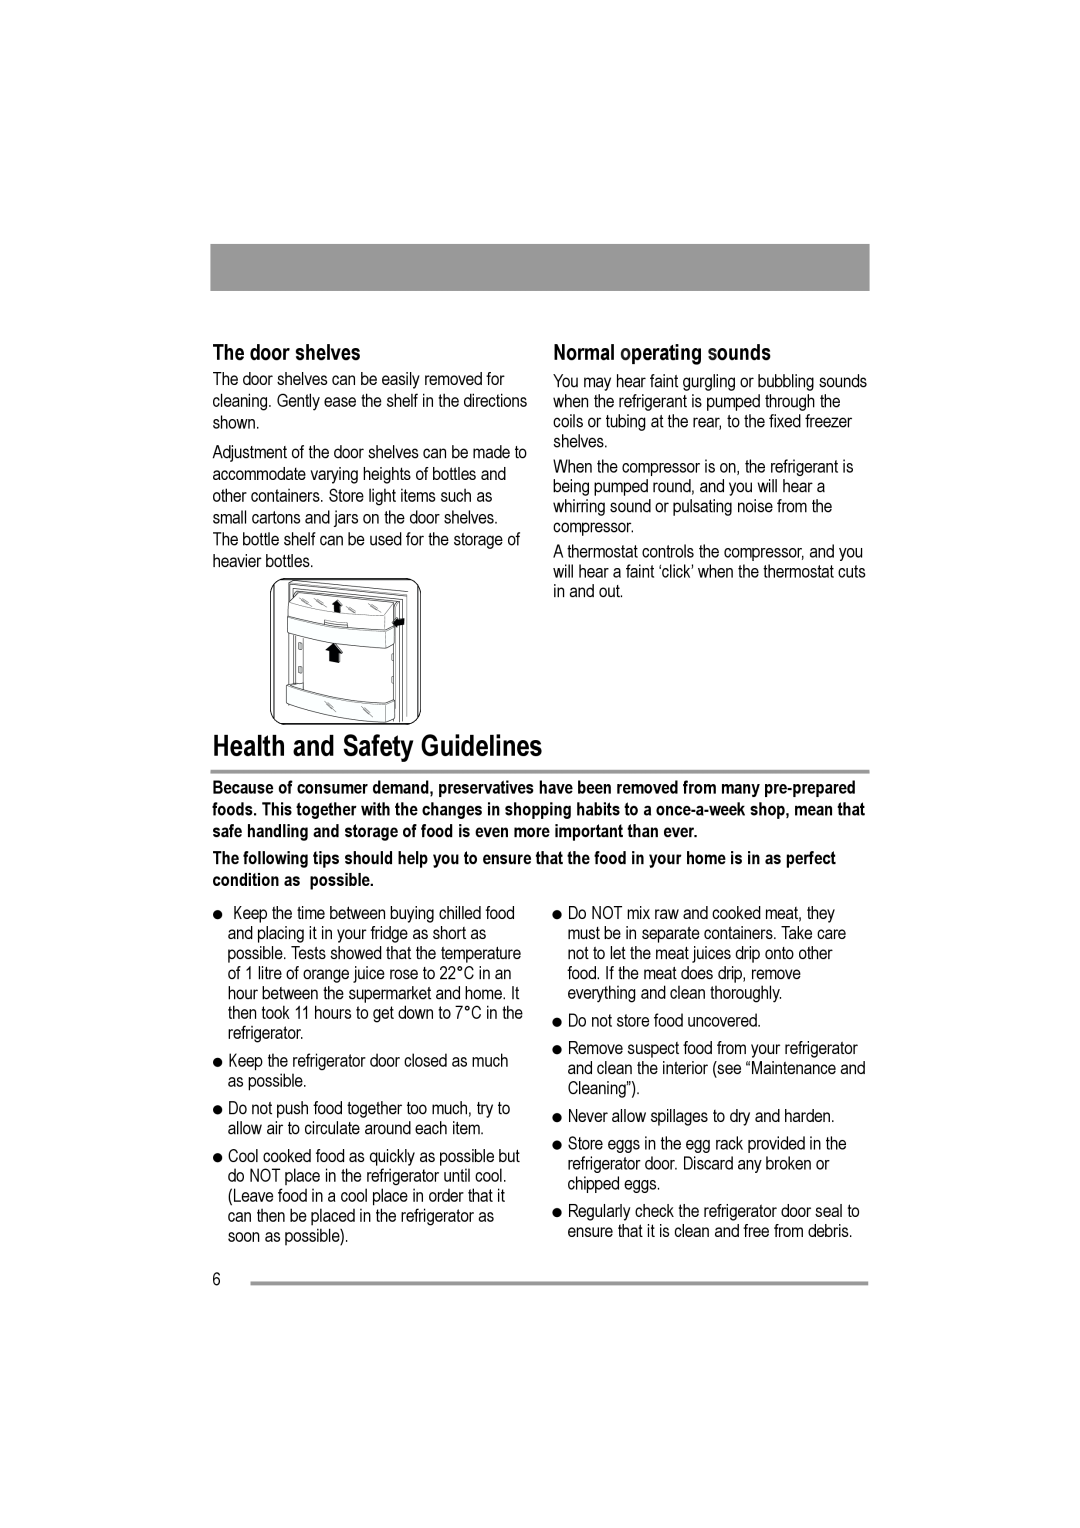 Moffat MUL 514 user manual Health and Safety Guidelines, The door shelves, Normal operating sounds 